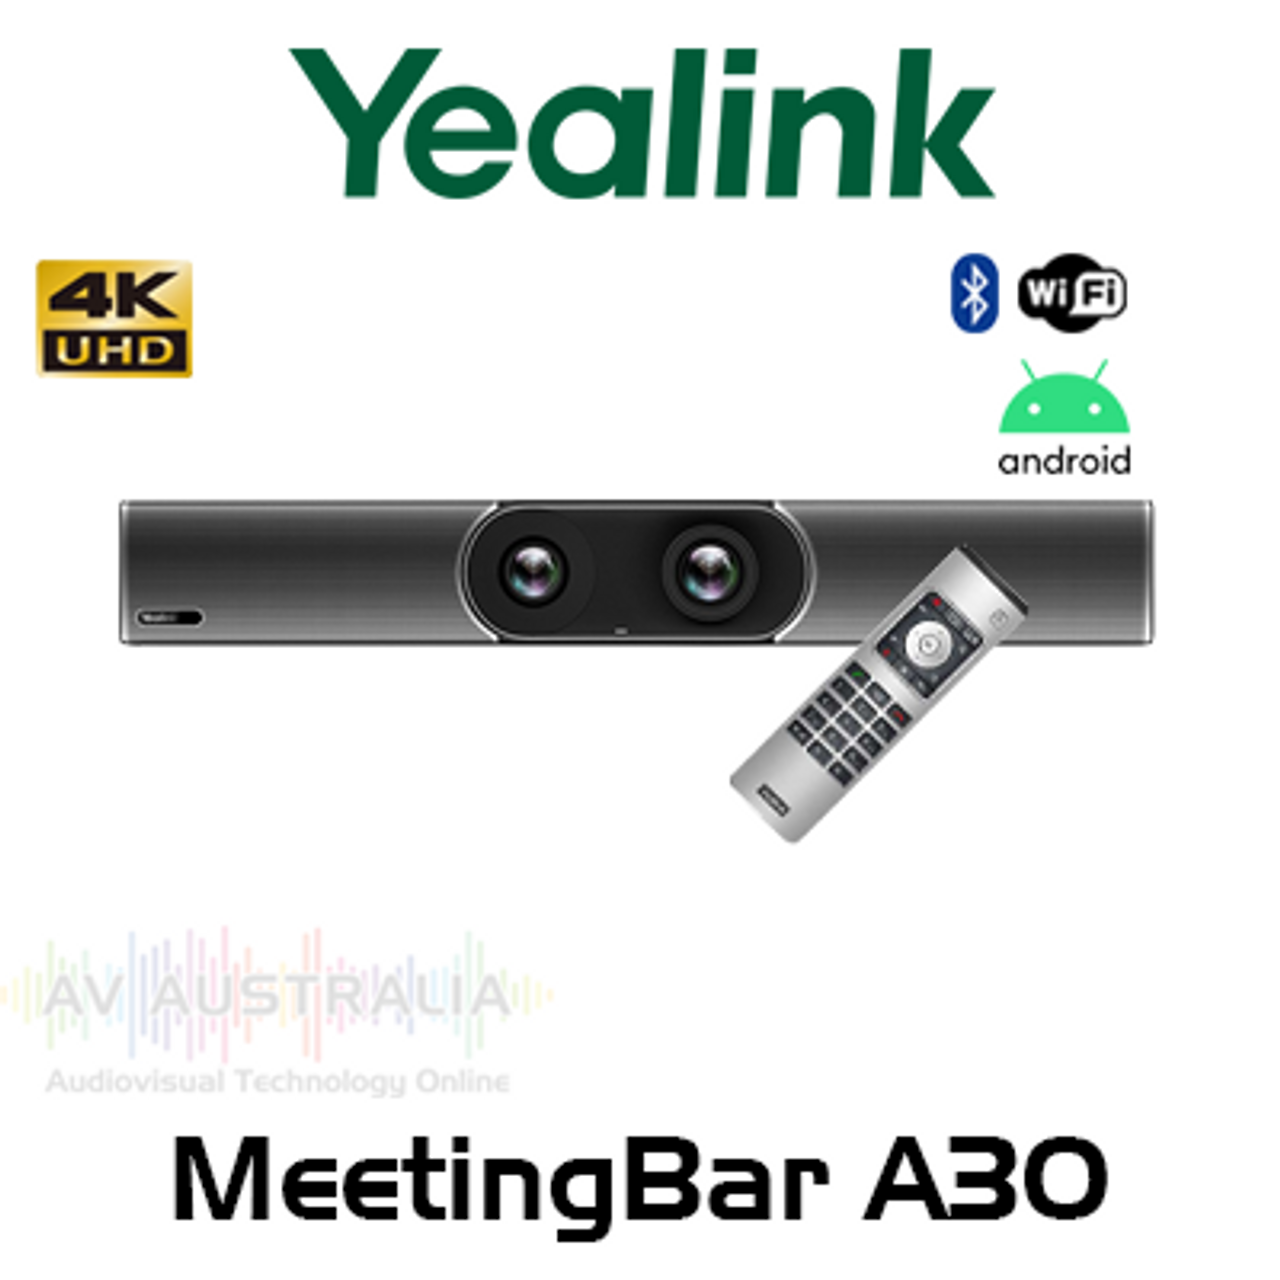 Yealink MeetingBar A30 All-In-One Android Video Bar with VCR11 Remote